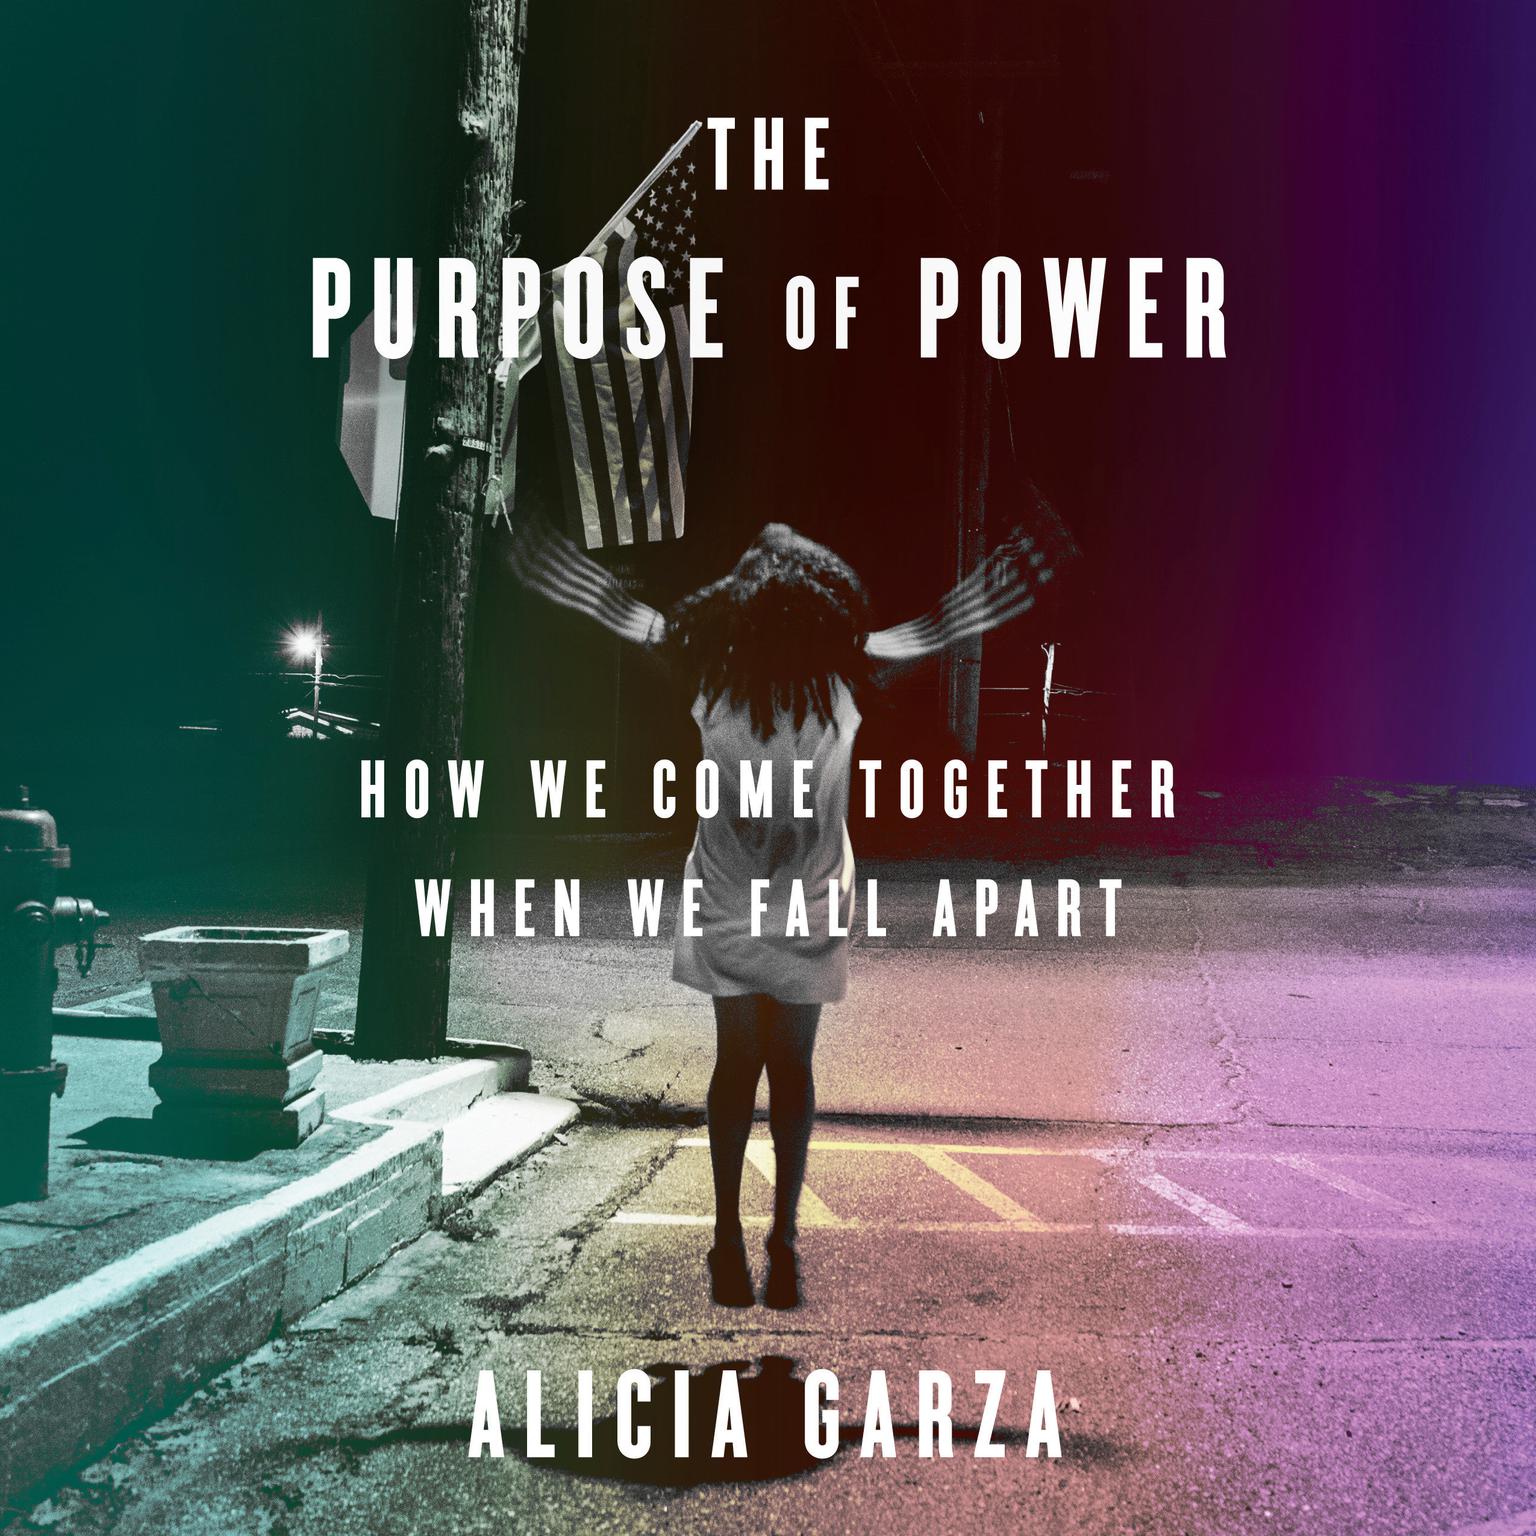 The Purpose of Power: How We Come Together When We Fall Apart Audiobook, by Alicia Garza